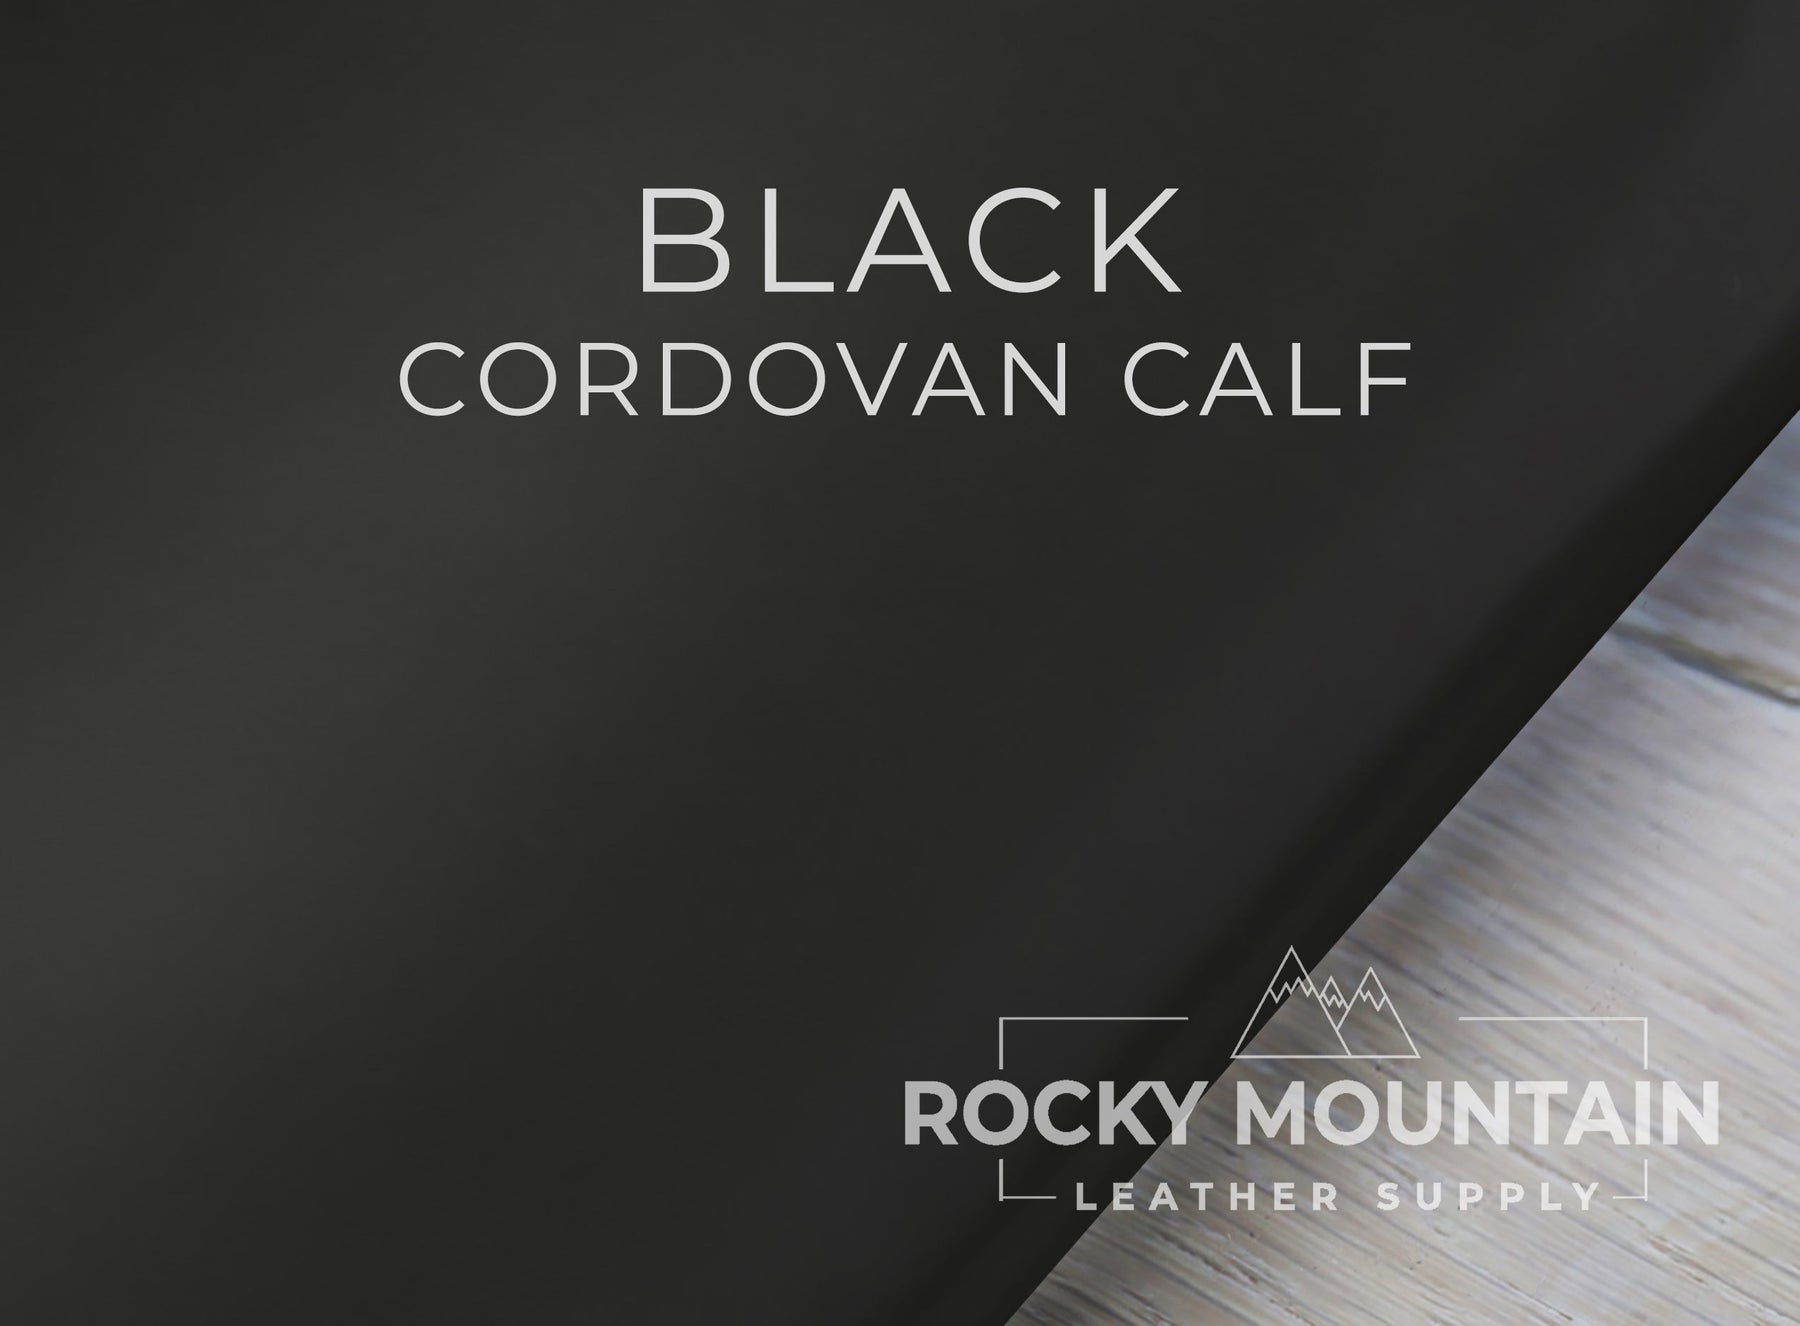 Cordovan Calf 🇪🇺 - Luxury Calfskin Leather "Finished like Shell Cordovan" (PANELS)